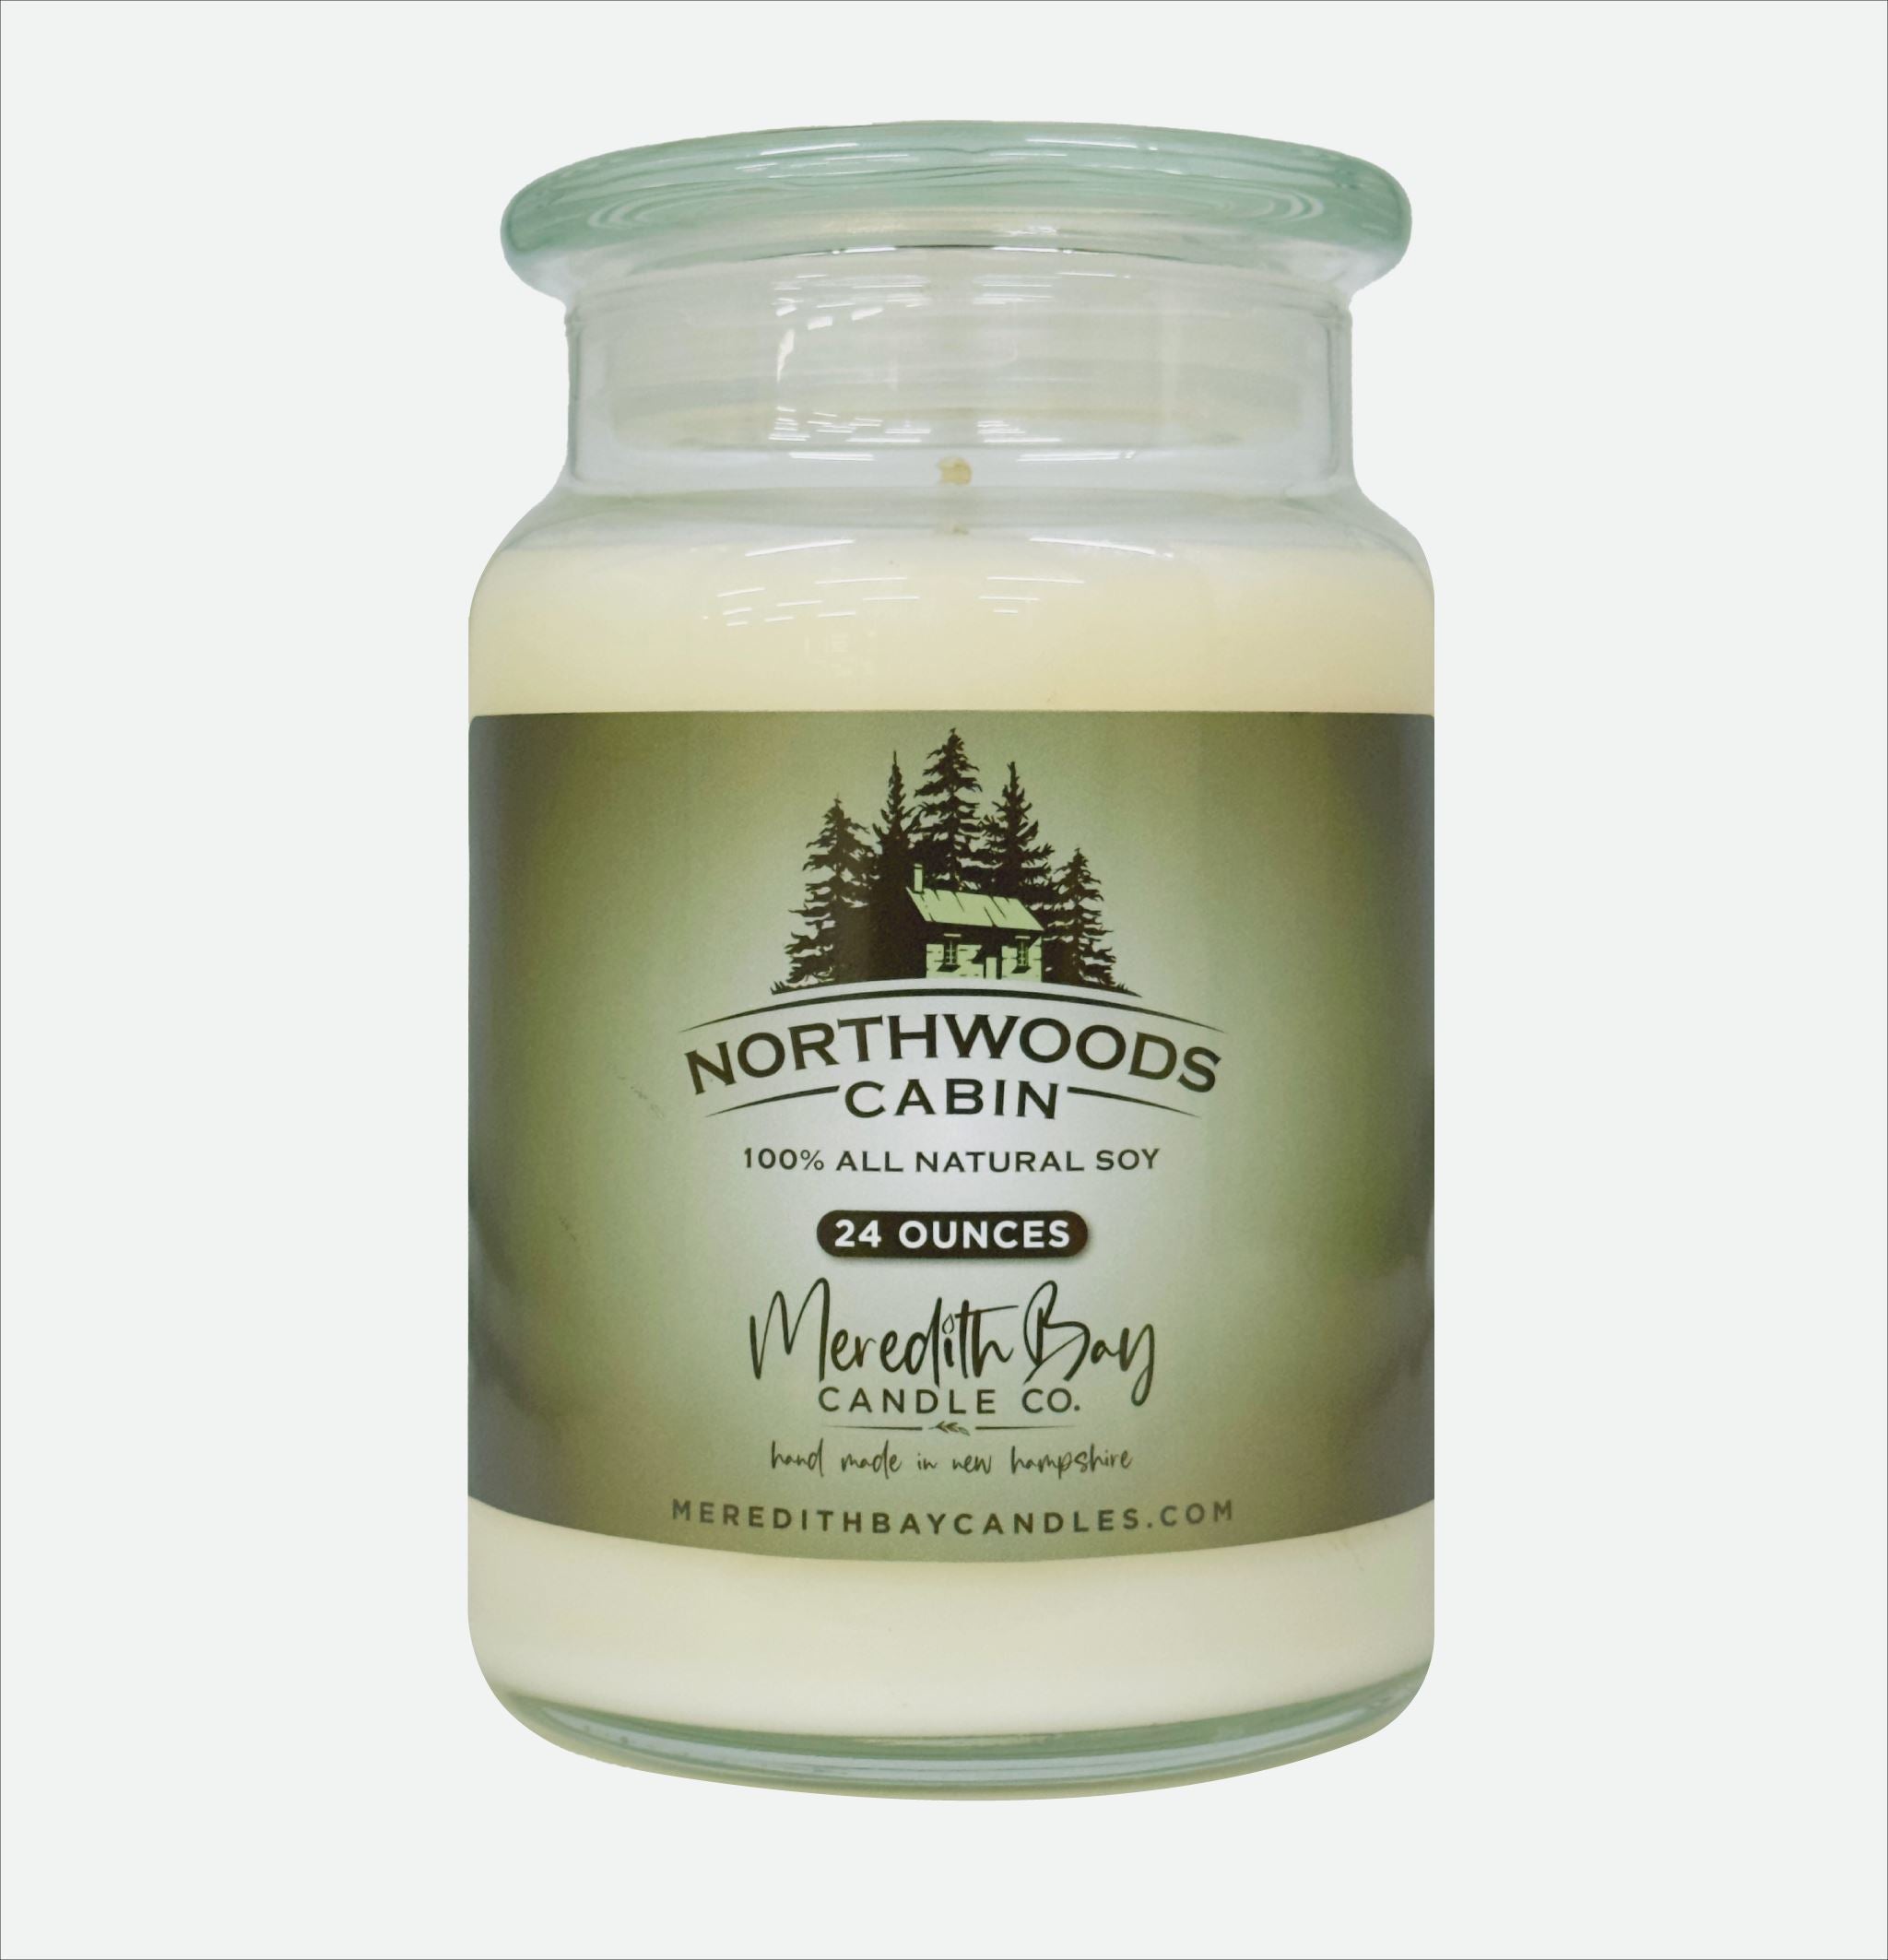 Northwoods Cabin Soy Candle Meredith Bay Candle Co 24 Oz 